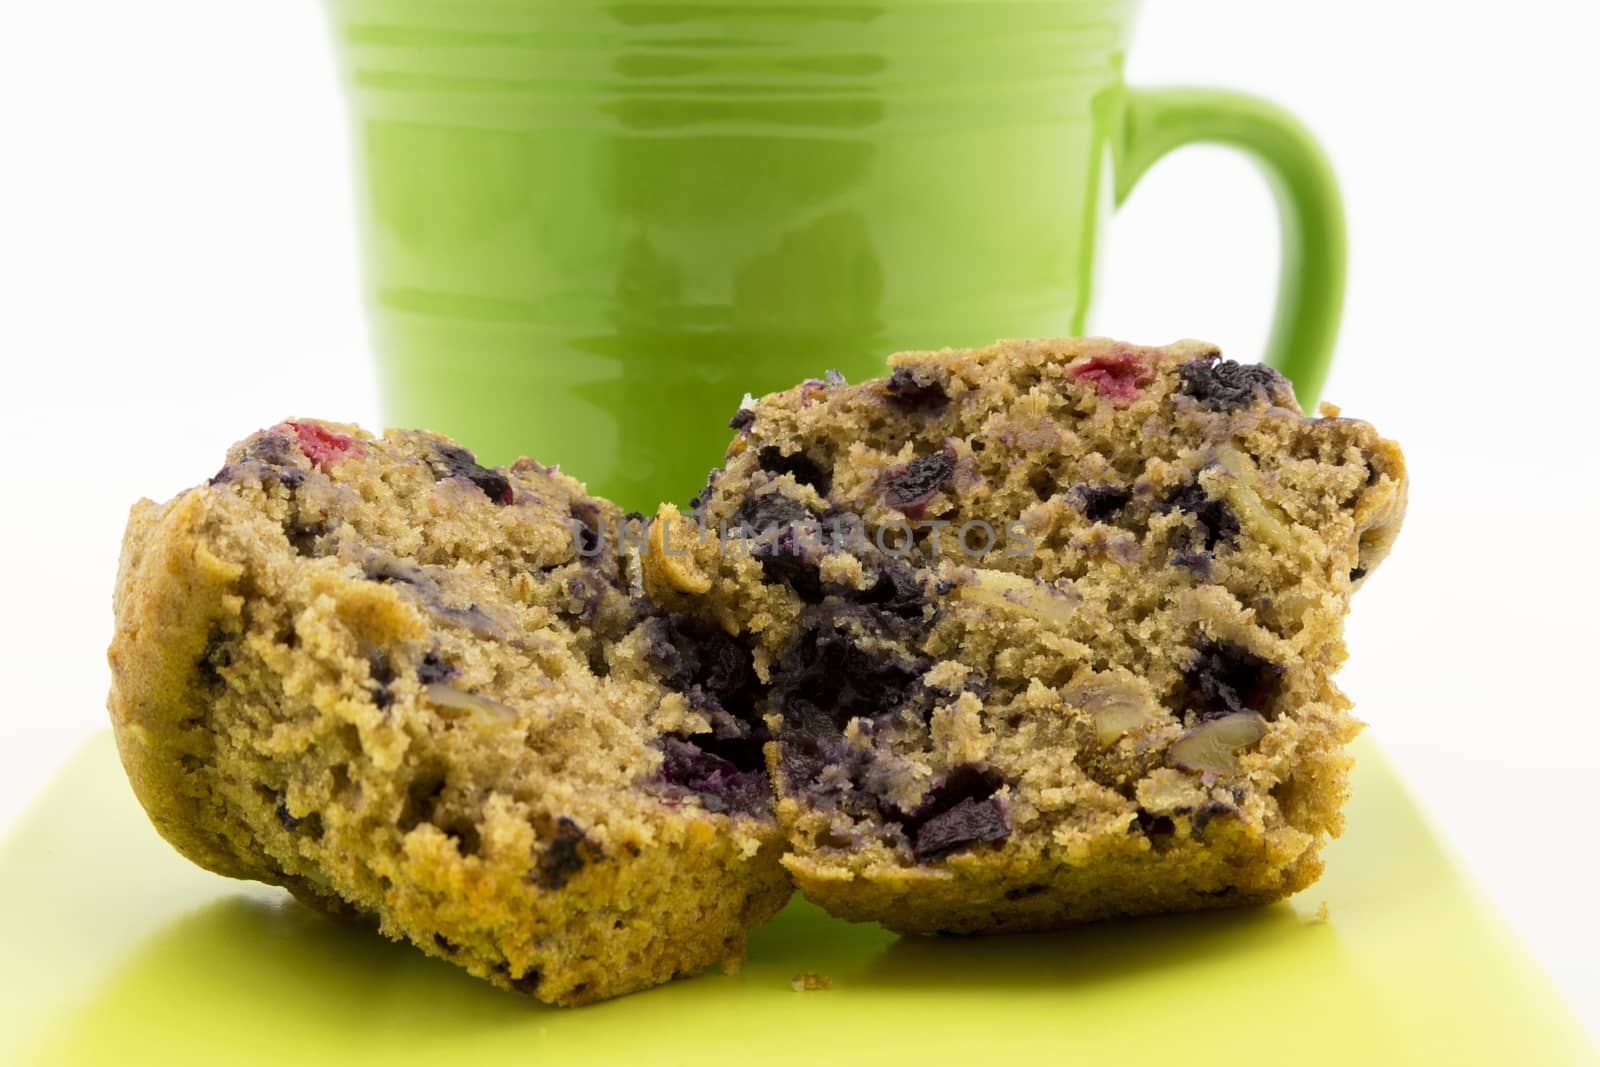 Delicious, healthy, whole grain muffin is  richly tasty with fruit and nuts.  Placed in front of hot coffee in green mug. Sliced muffin with crumbs on plate. 